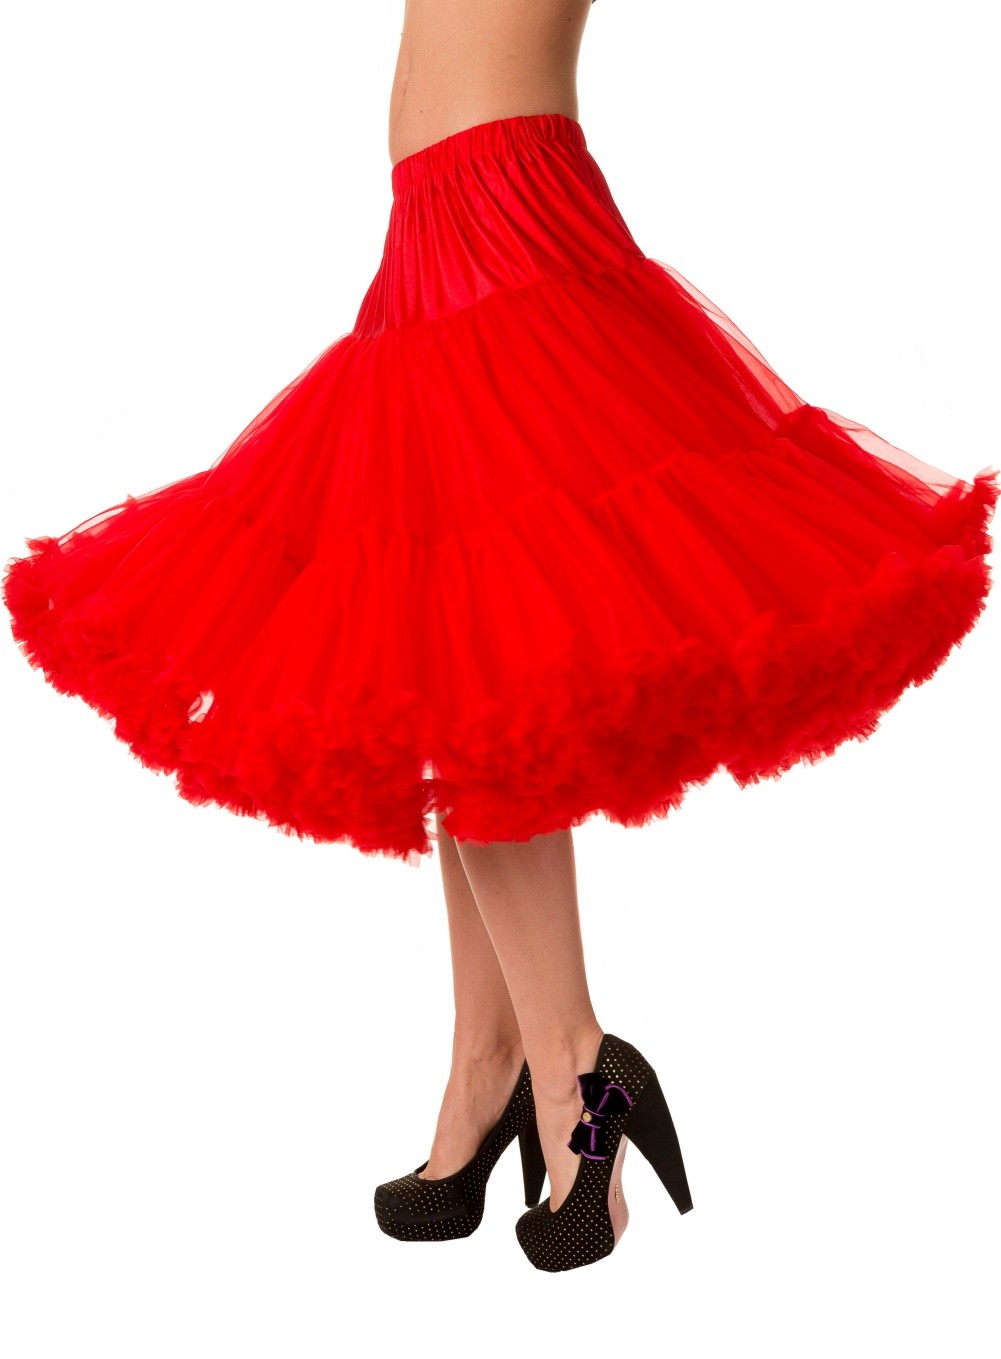 bnsbn236red_jupon-jupe-pin-up-retro-50-s-rockabilly-66cm-rouge_1